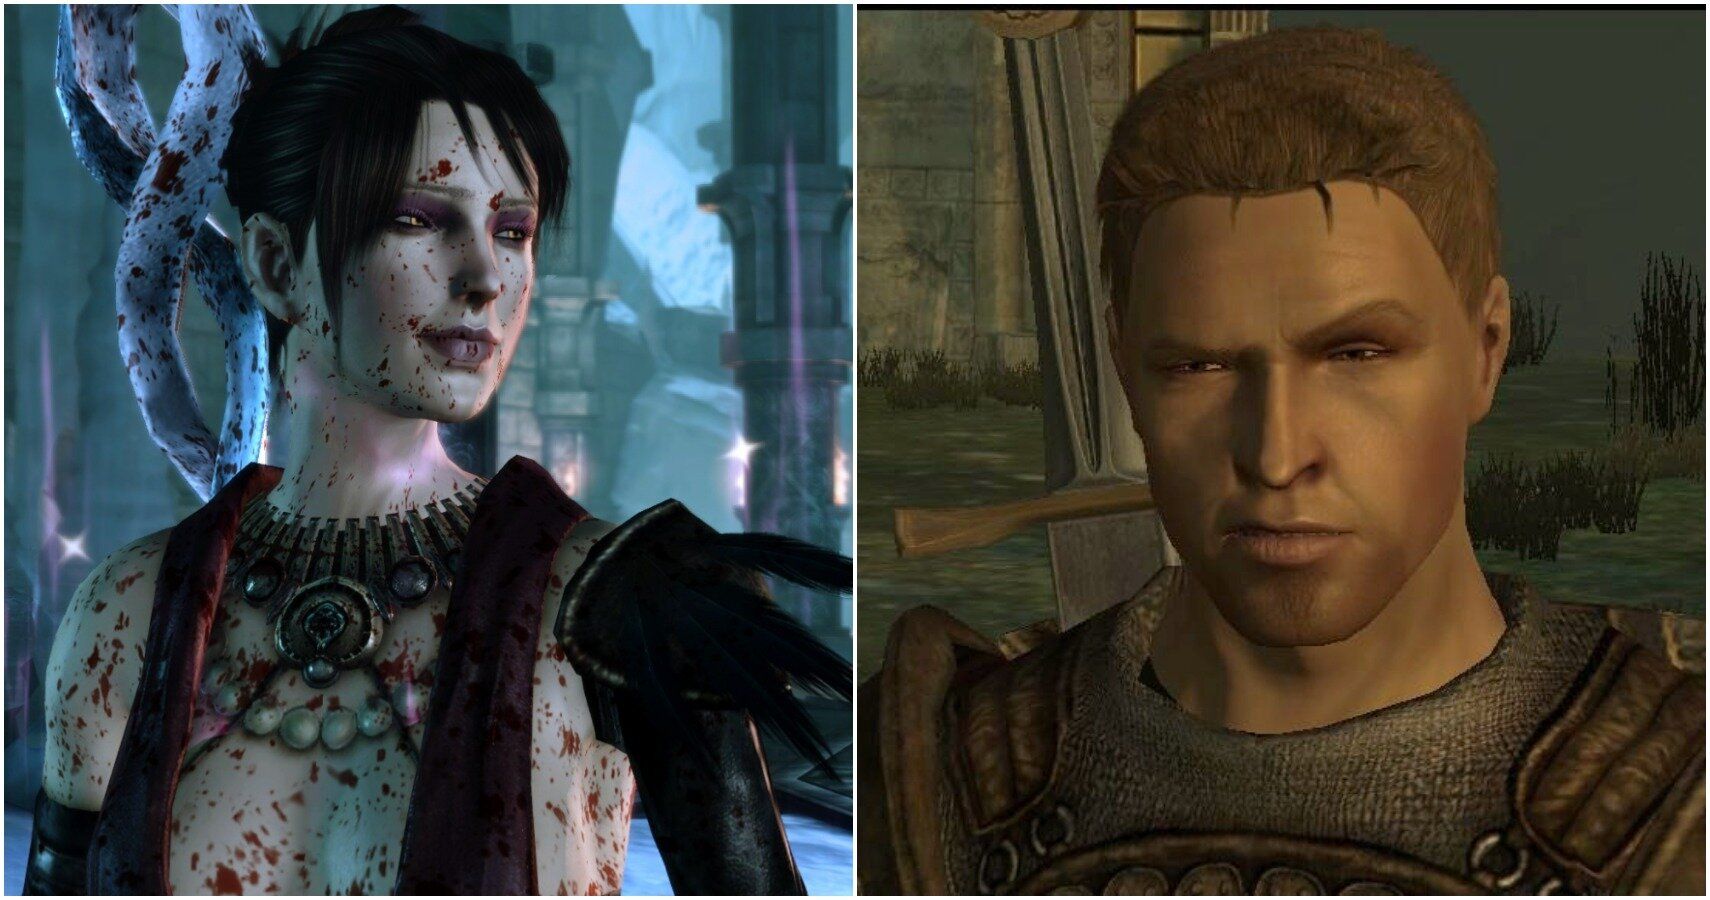 Radiator Blog: Dragon Age: Origins is the First Game About Gay Marriage +  The Power of Mods